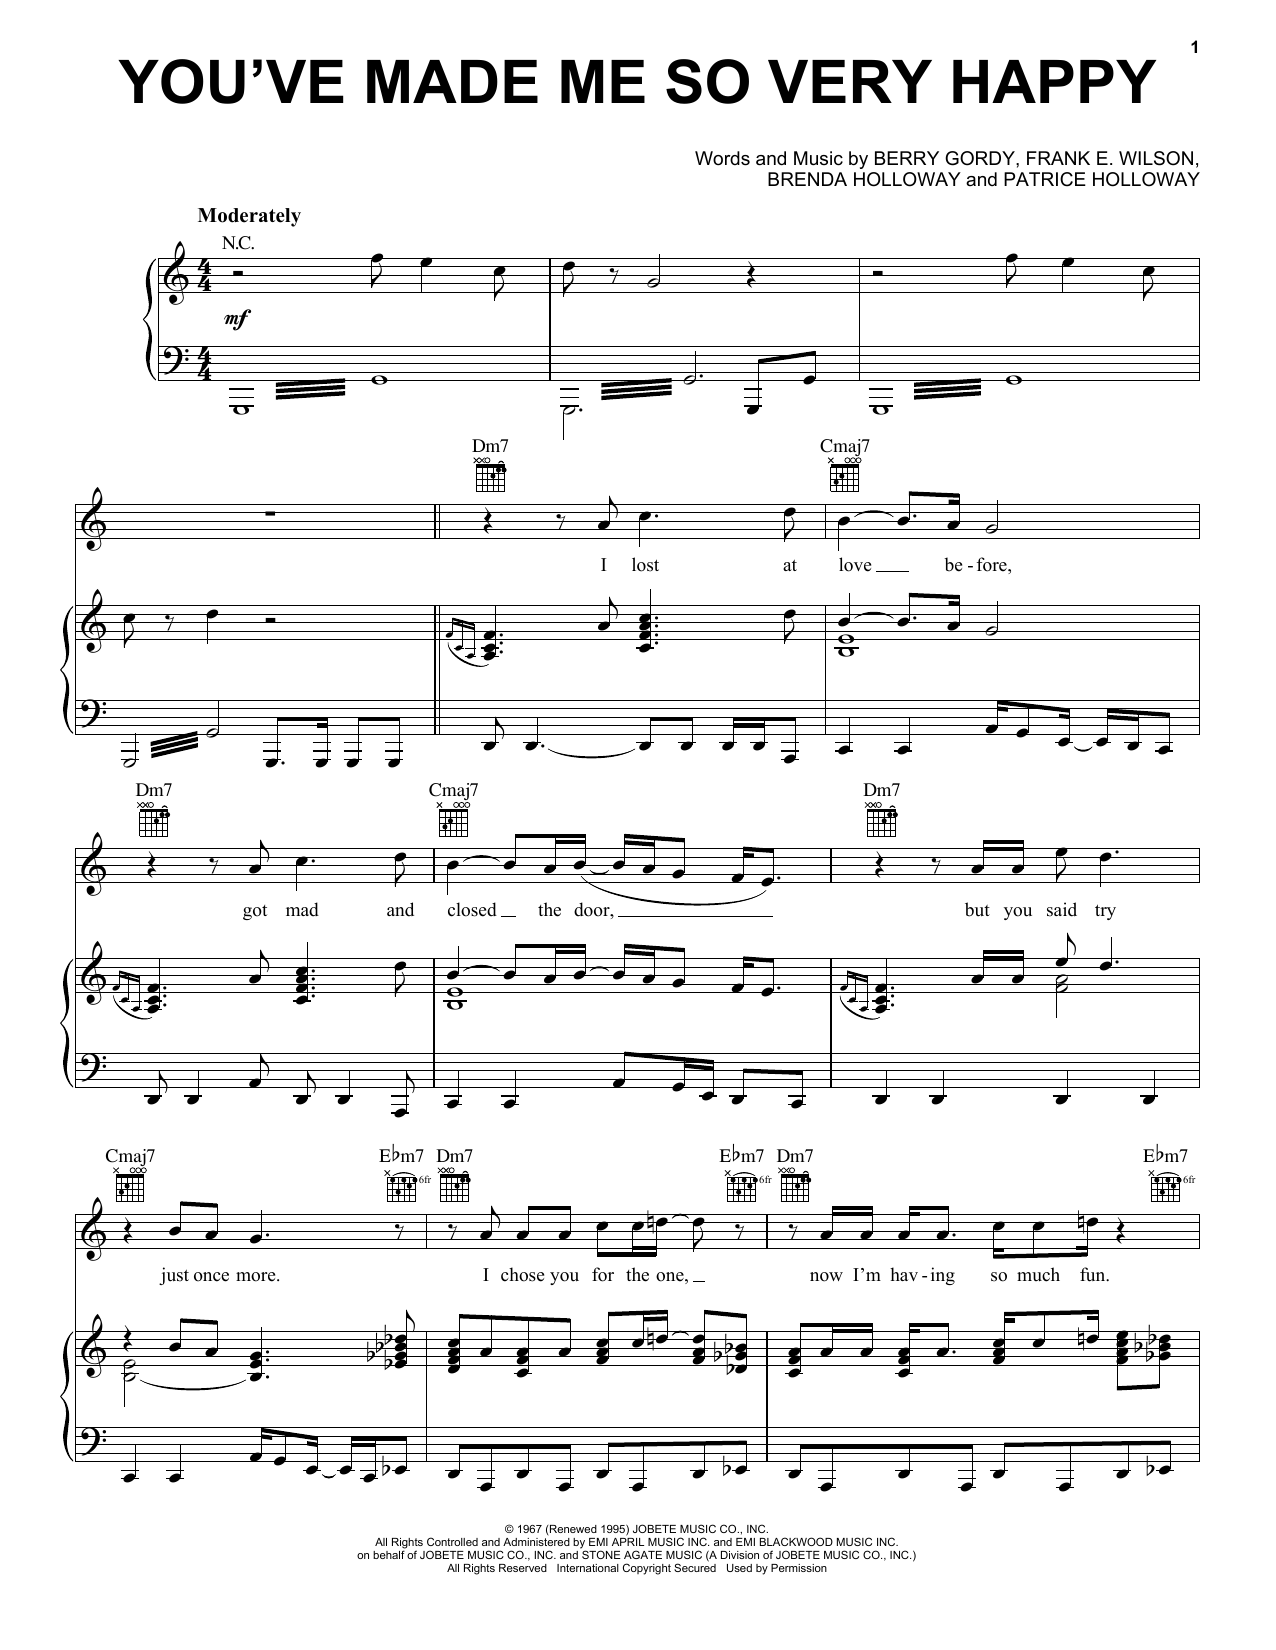 Blood, Sweat & Tears You've Made Me So Very Happy sheet music notes printable PDF score